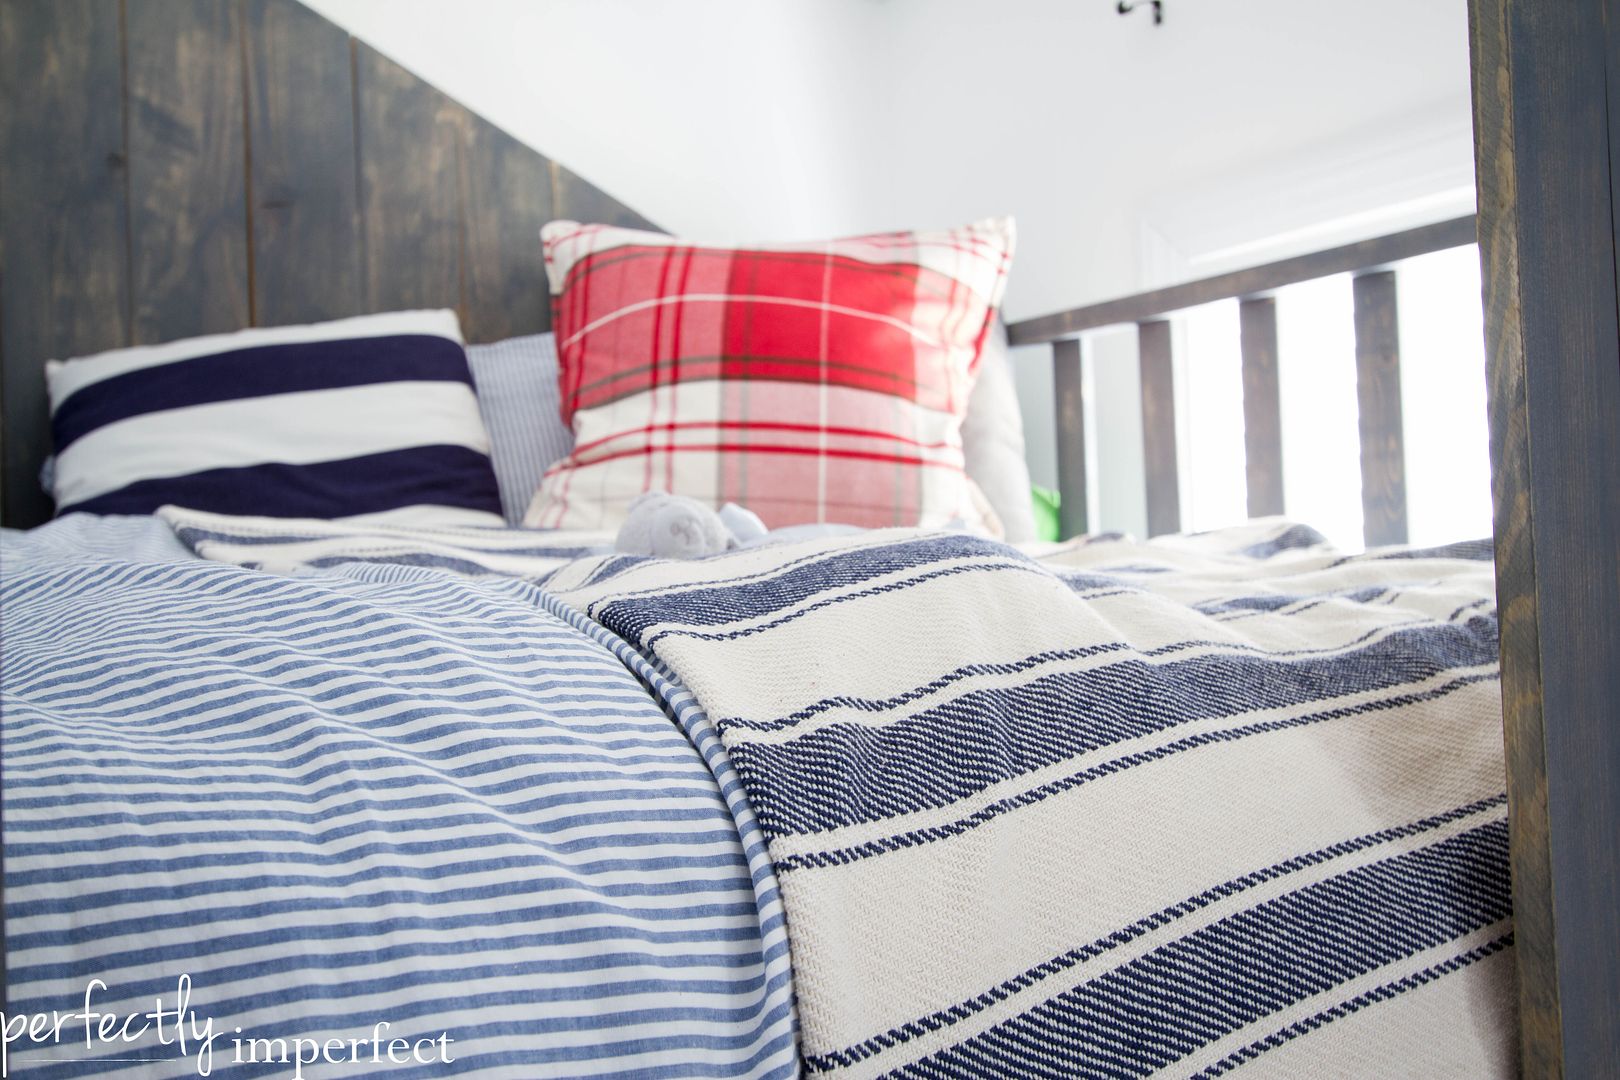 Boy's Room Reveal | perfectly imperfect